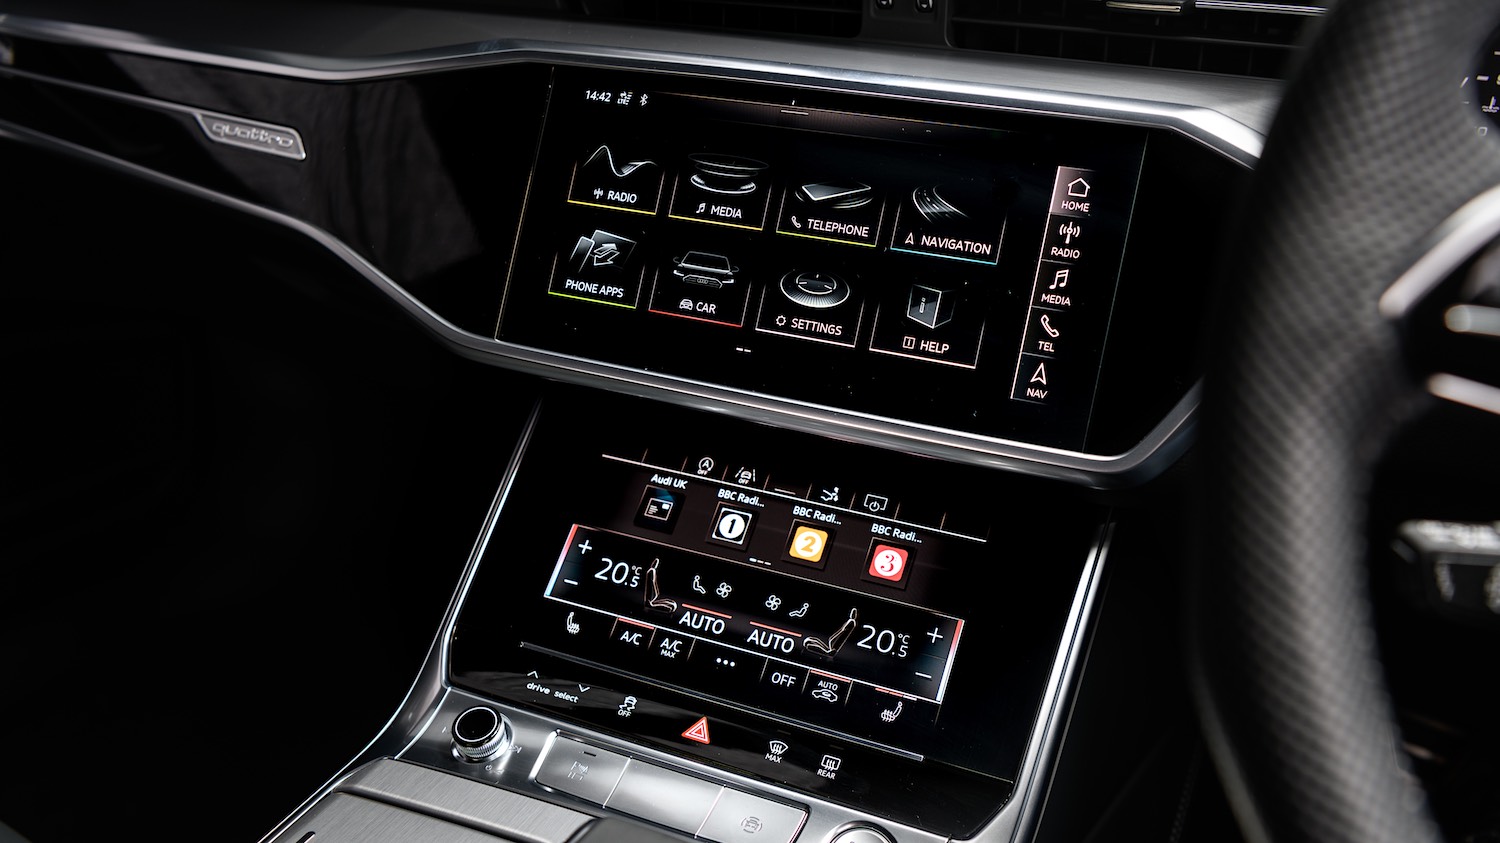 Neil Lyndon motoring correspondent reviews the latest Audi A7 for Drive 3